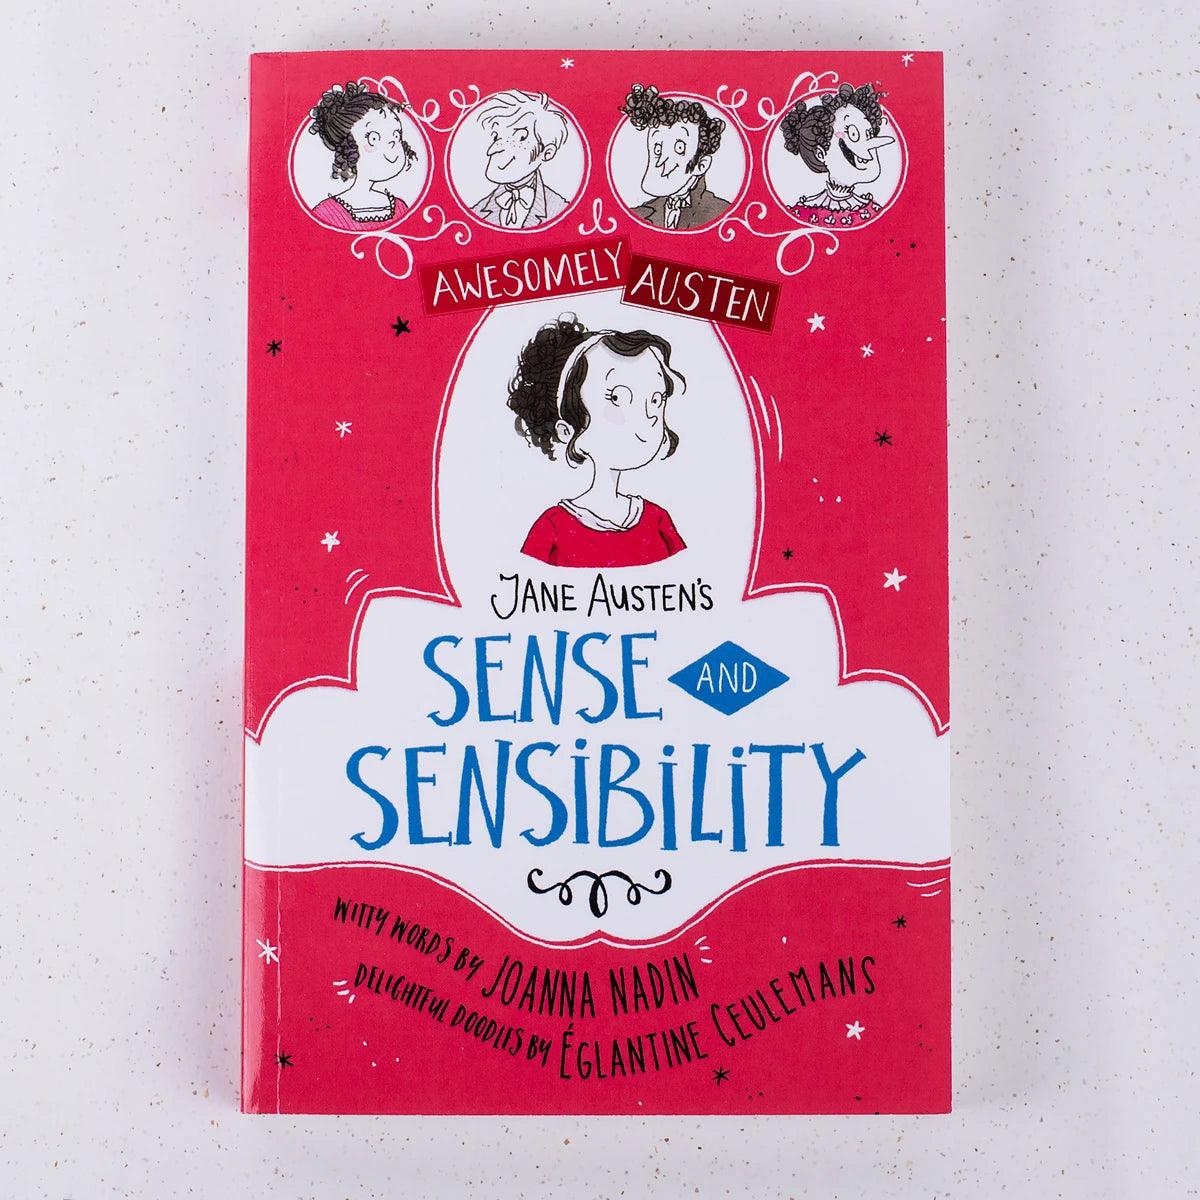 Jane Austen's Sense and Sensibility - Awesomely Austen Retold & Illustrated